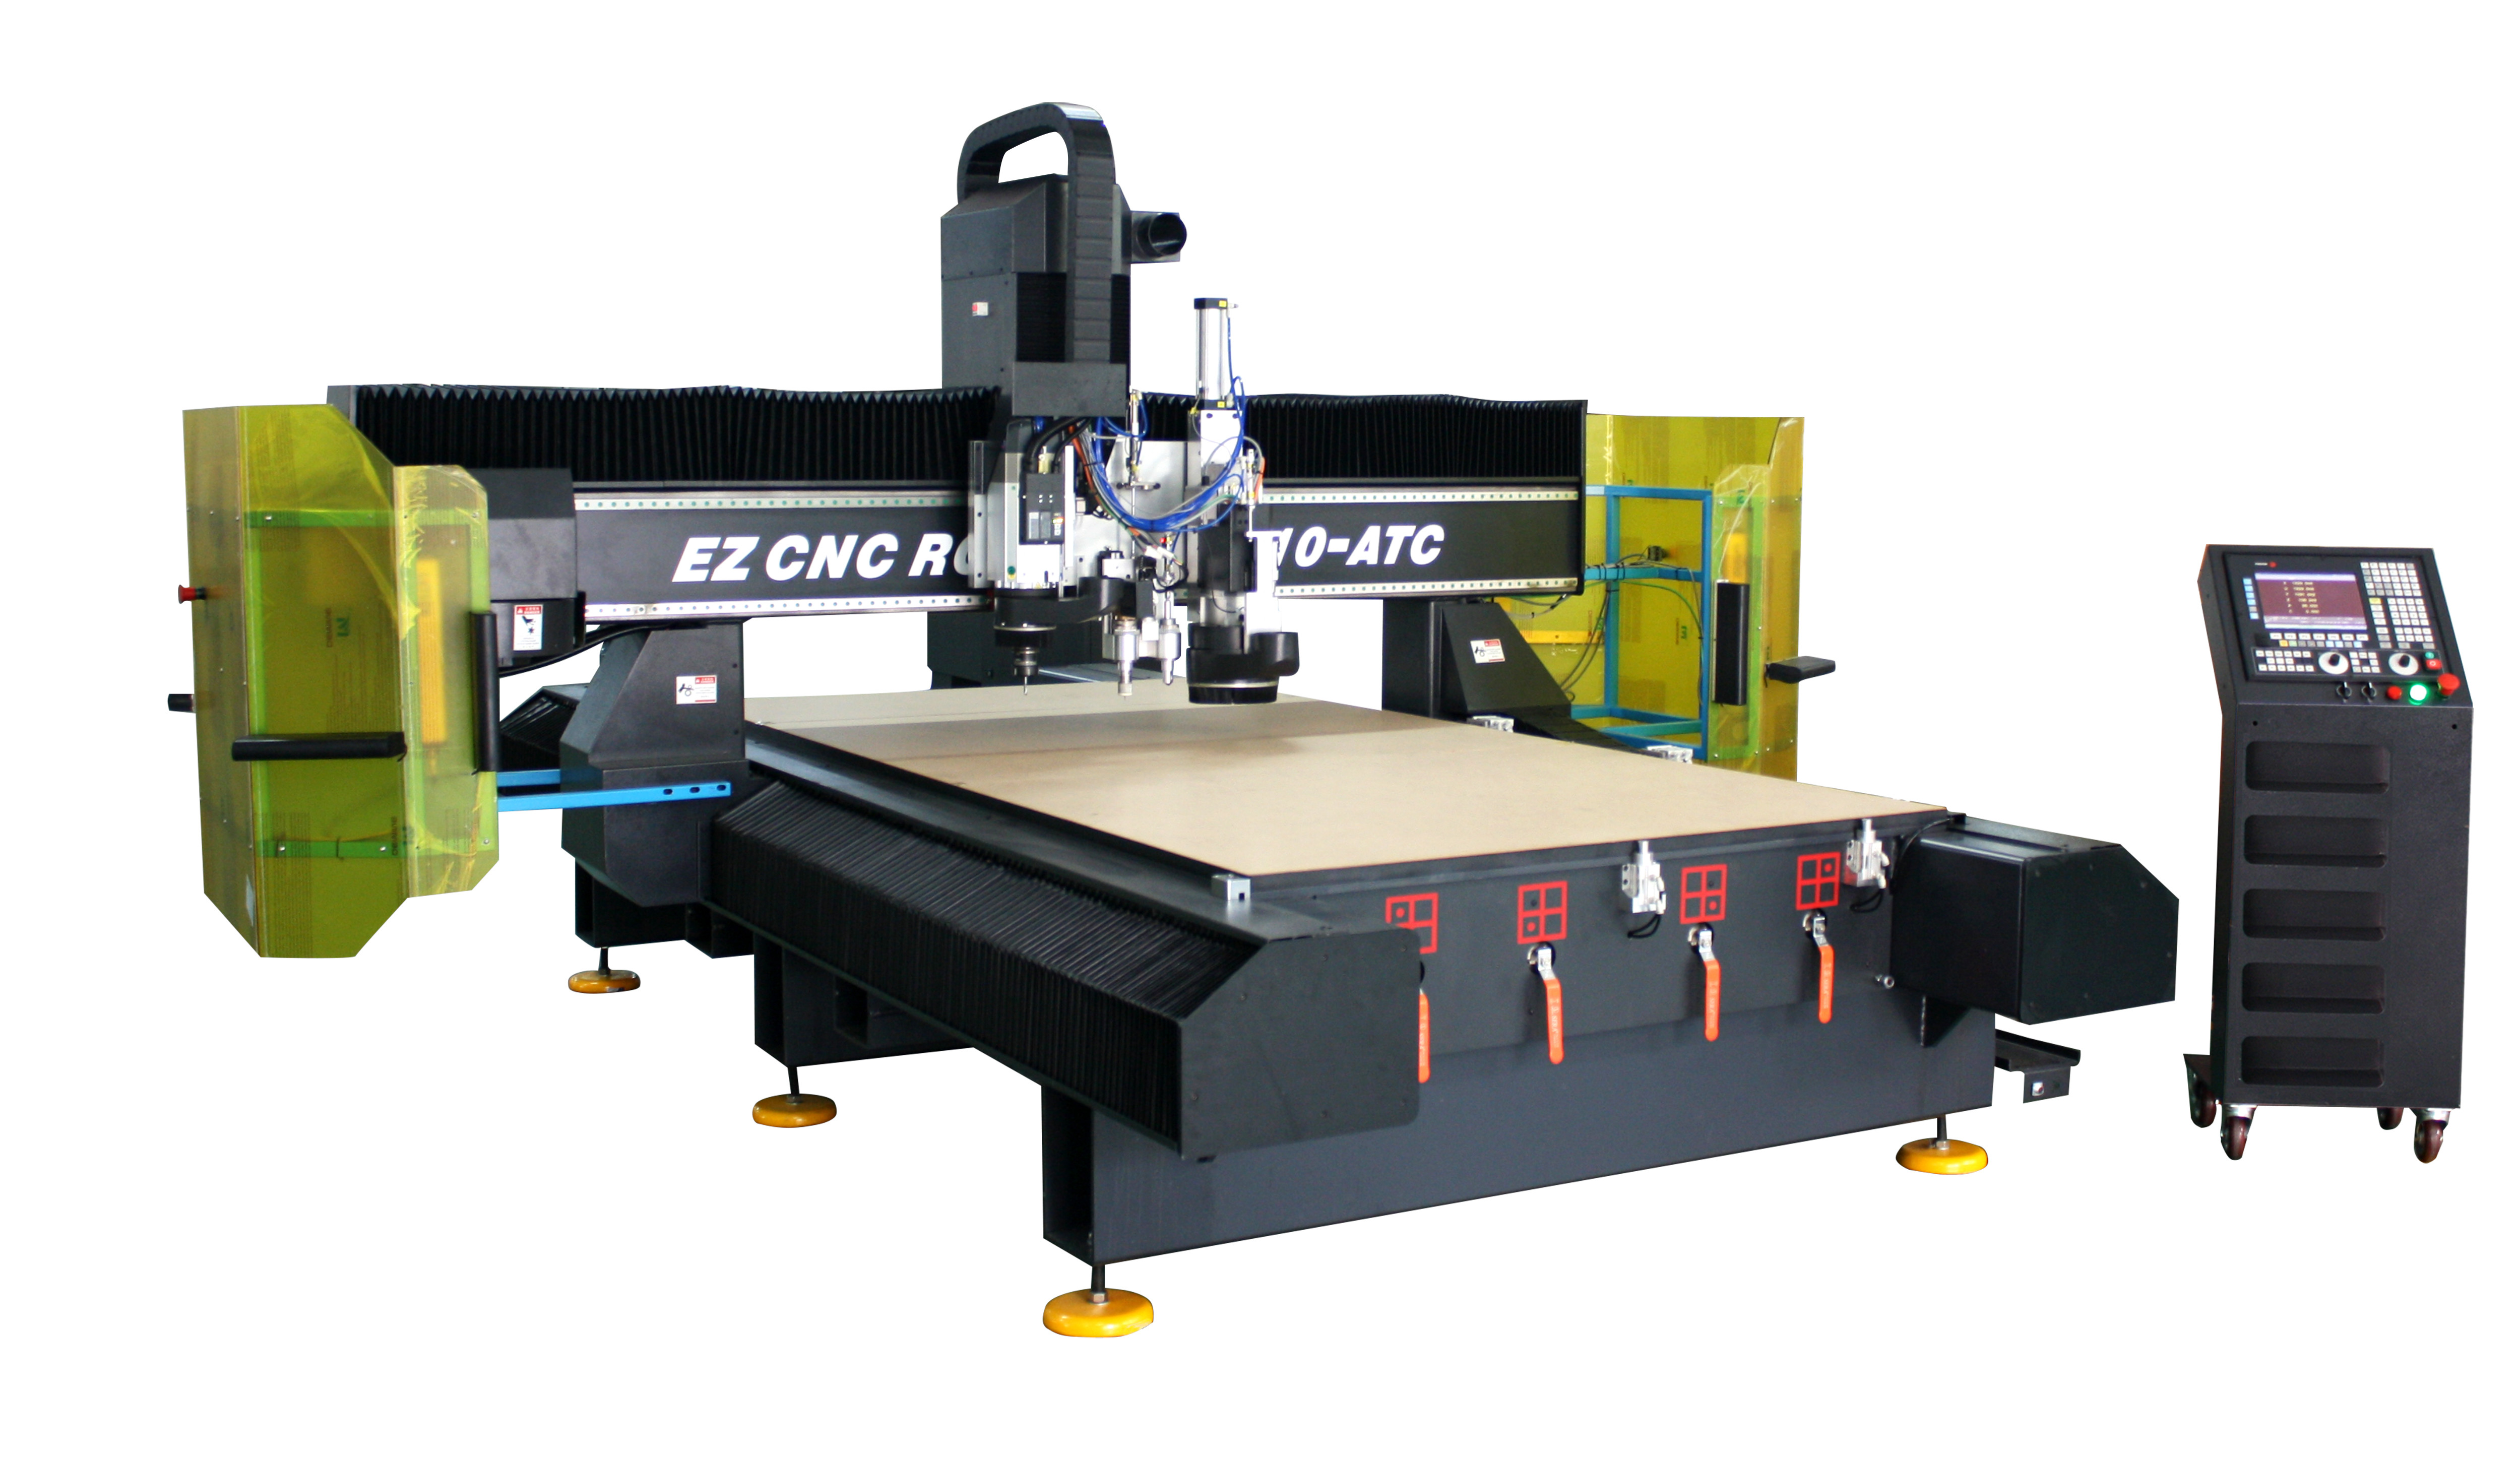  EZCNC Routers-GR 2040/Wood, Acrylic, Alu. 3D Surface; SolidSurface cutting, engraving and marking system Manufactures